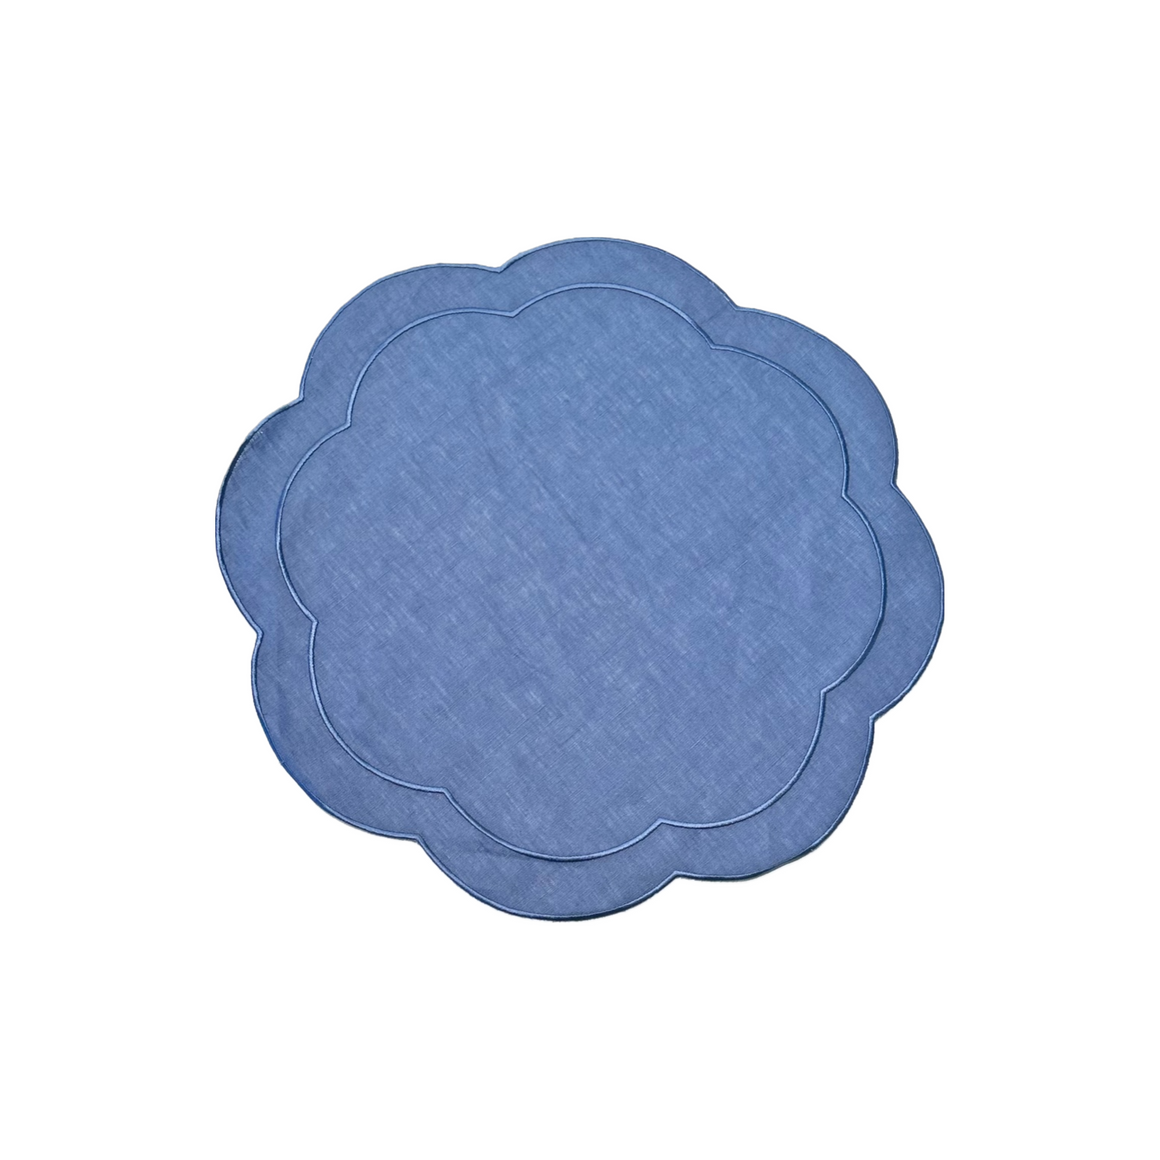 Blue Linen Placemats with Scalloped Edge, Set of 4